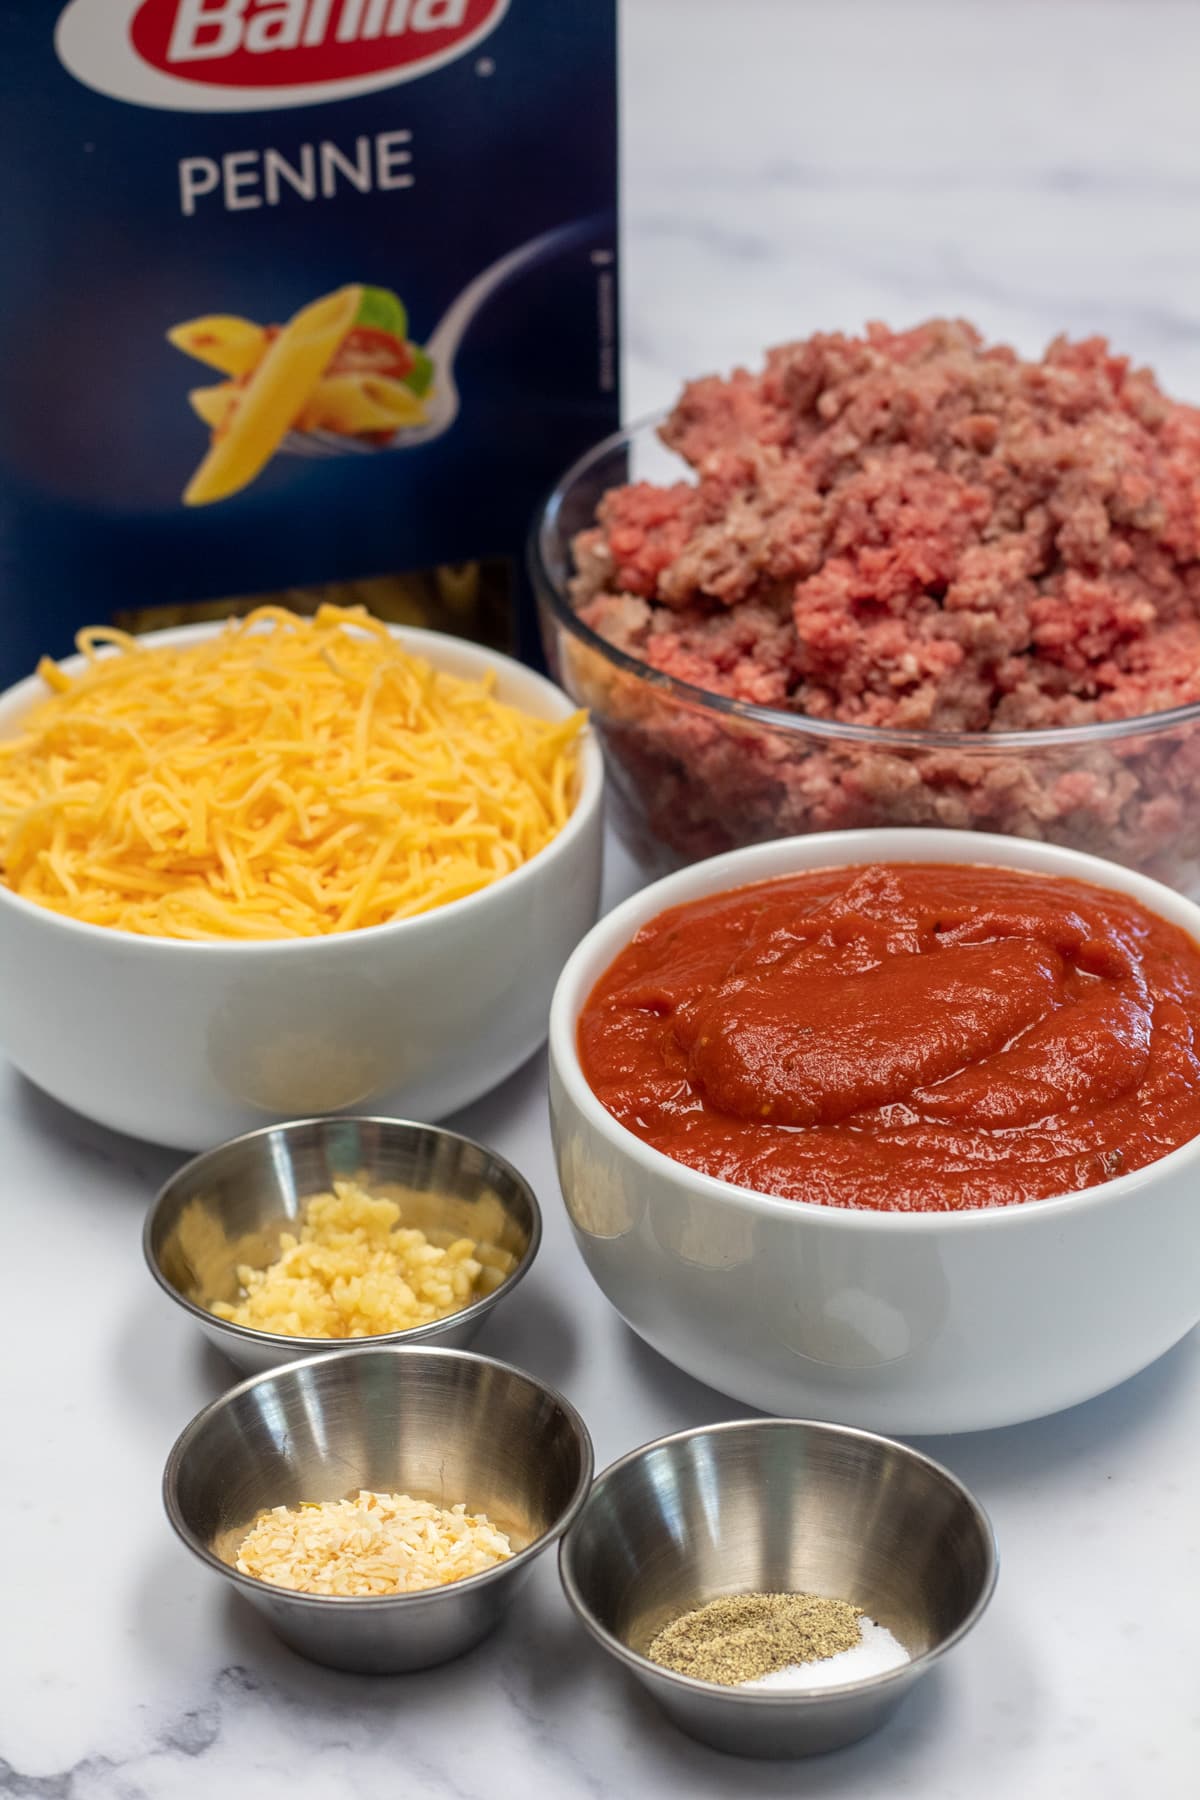 Photo showing ingredients needed for ground beef casserole.